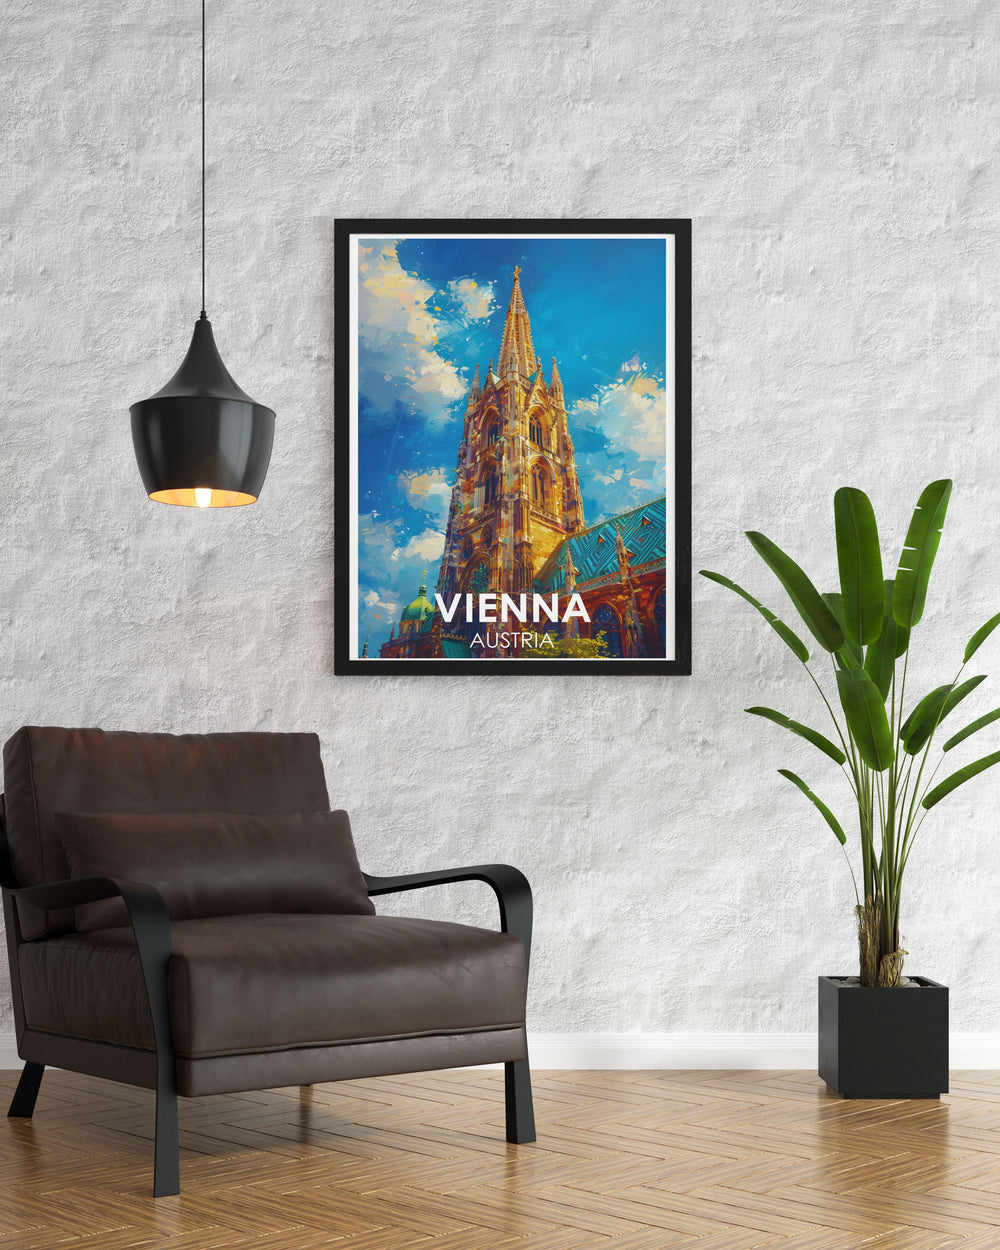 Captivating Vienna Poster of St. Stephens Cathedral highlighting the beauty and grandeur of this historic landmark a perfect piece of wall art for celebrating Viennas rich cultural heritage and charm